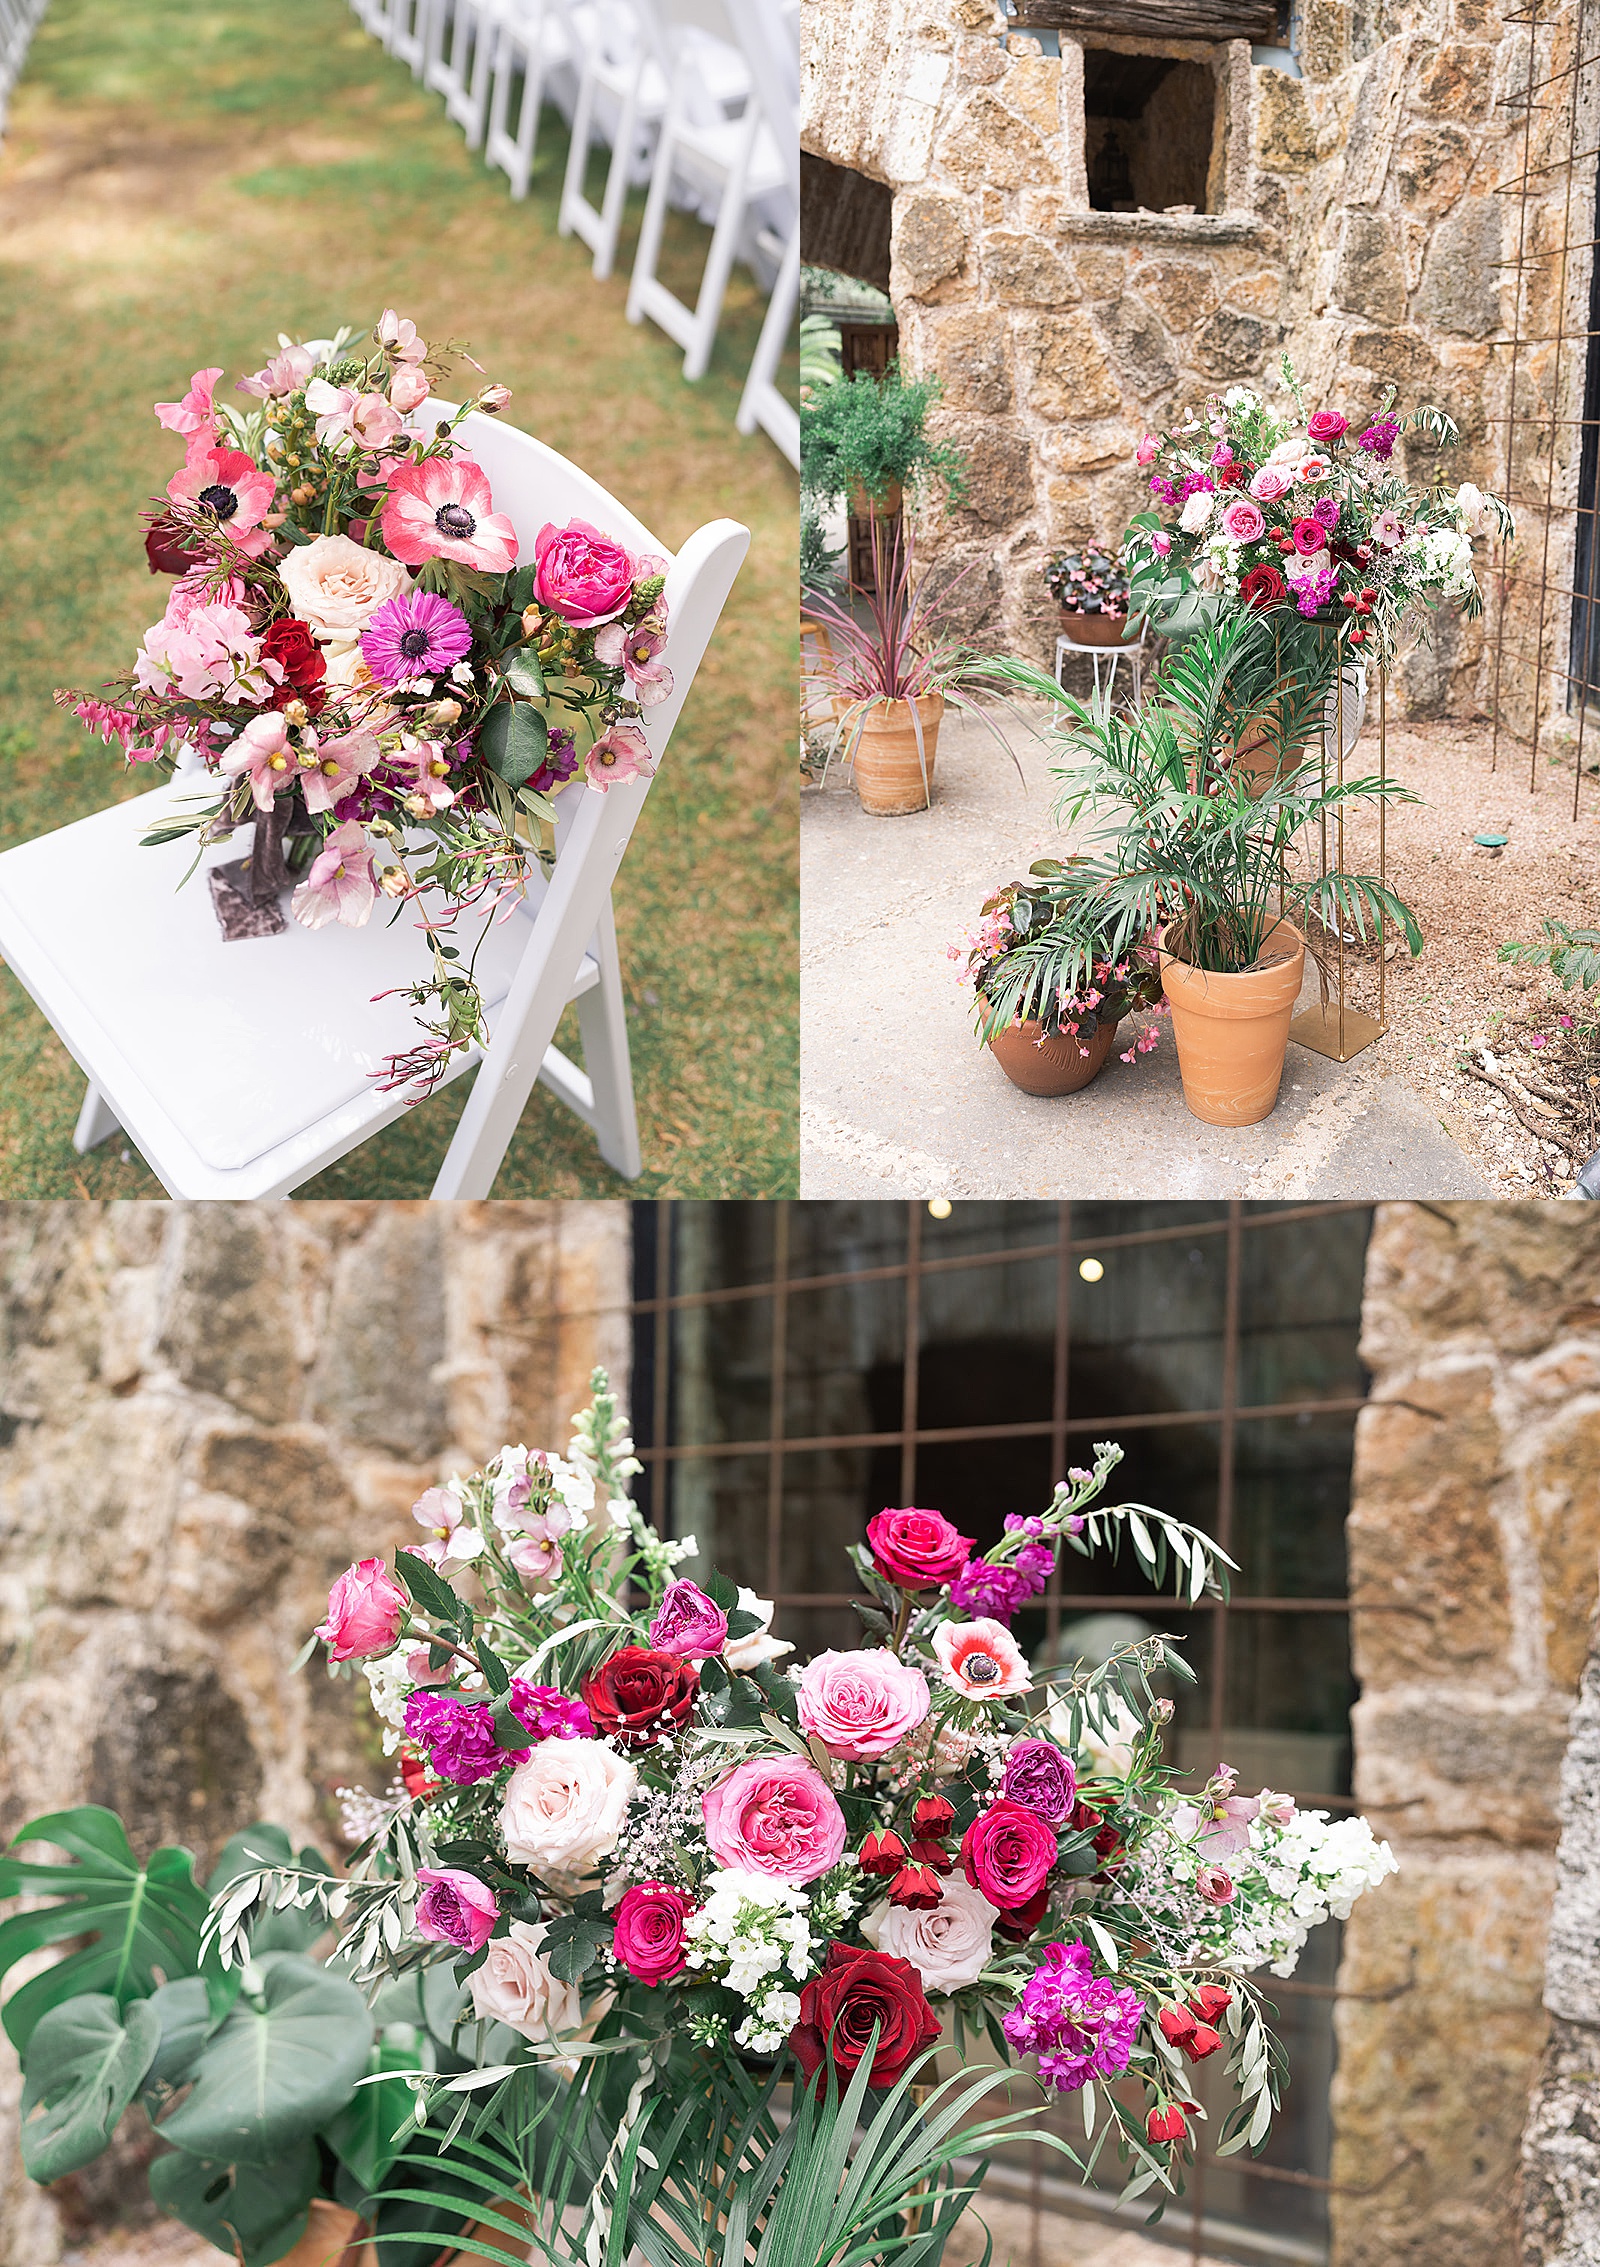 Gorgeous pink bouquets by Amanda Bee’s Floral Design